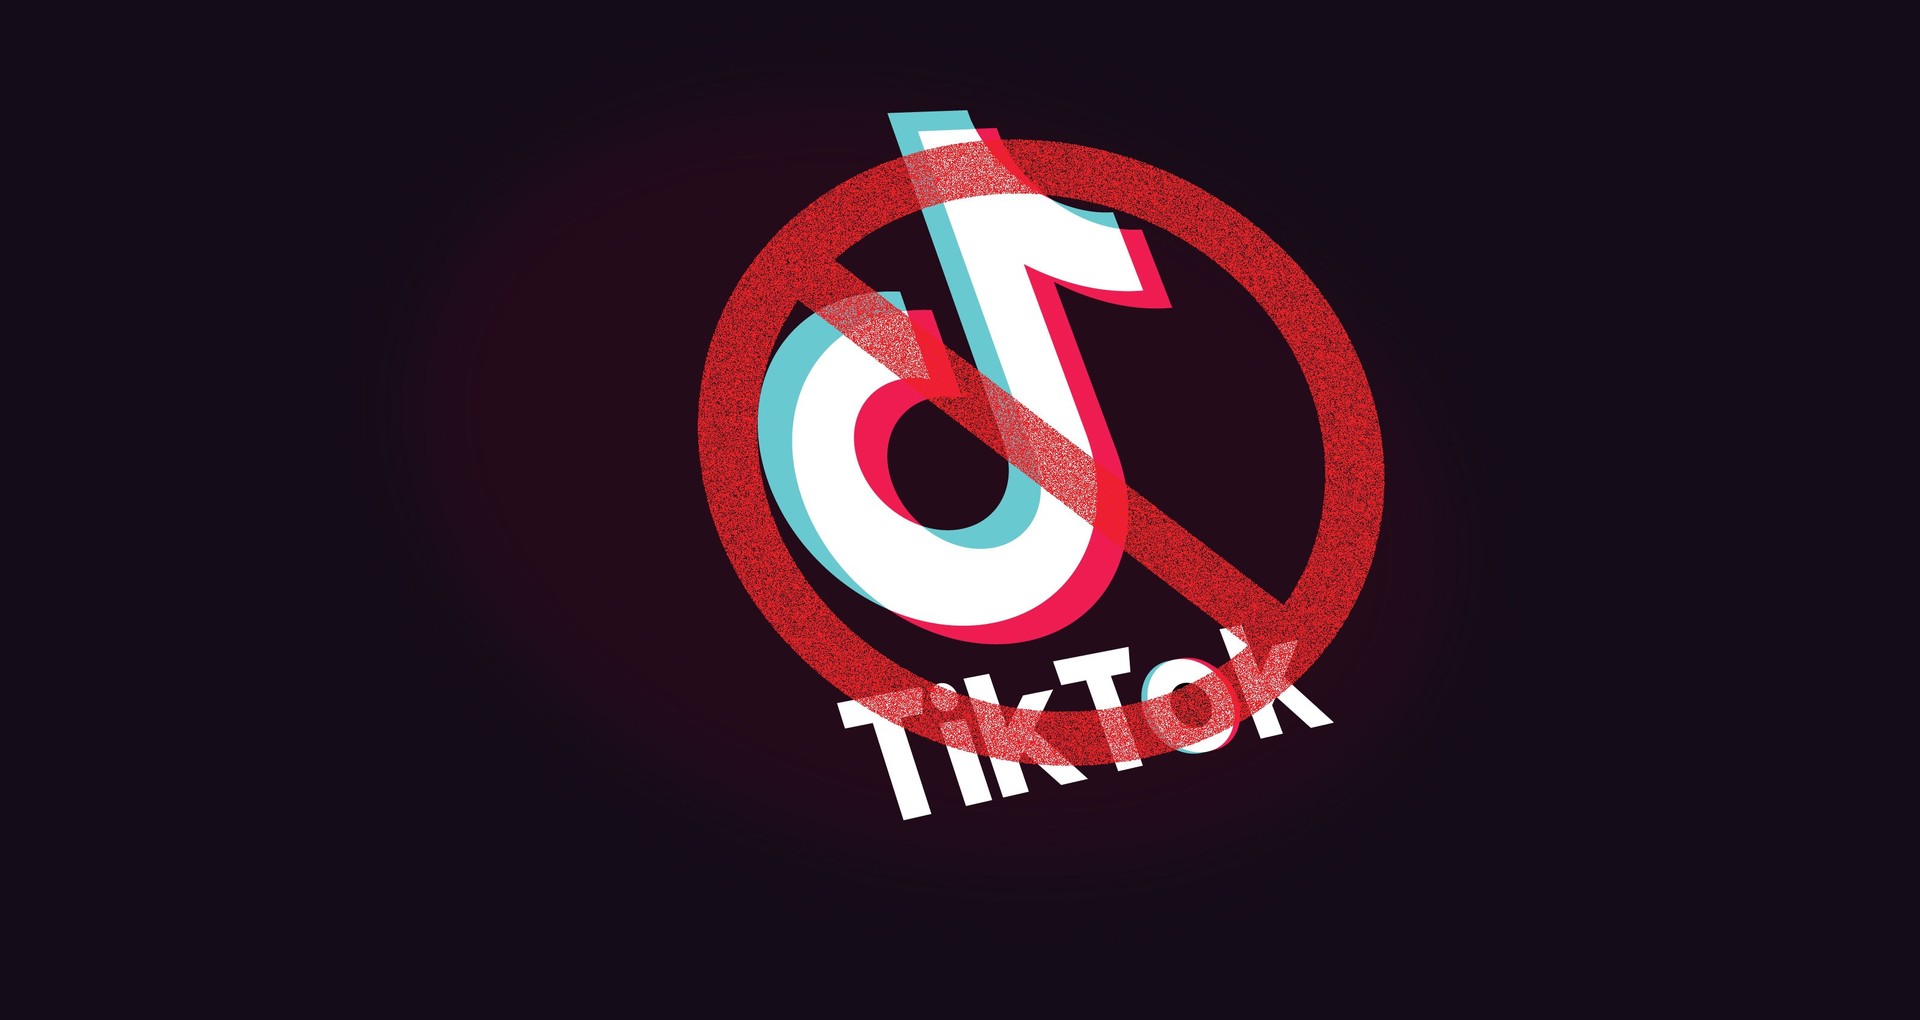 TikTok banned from government cell phones in US state
